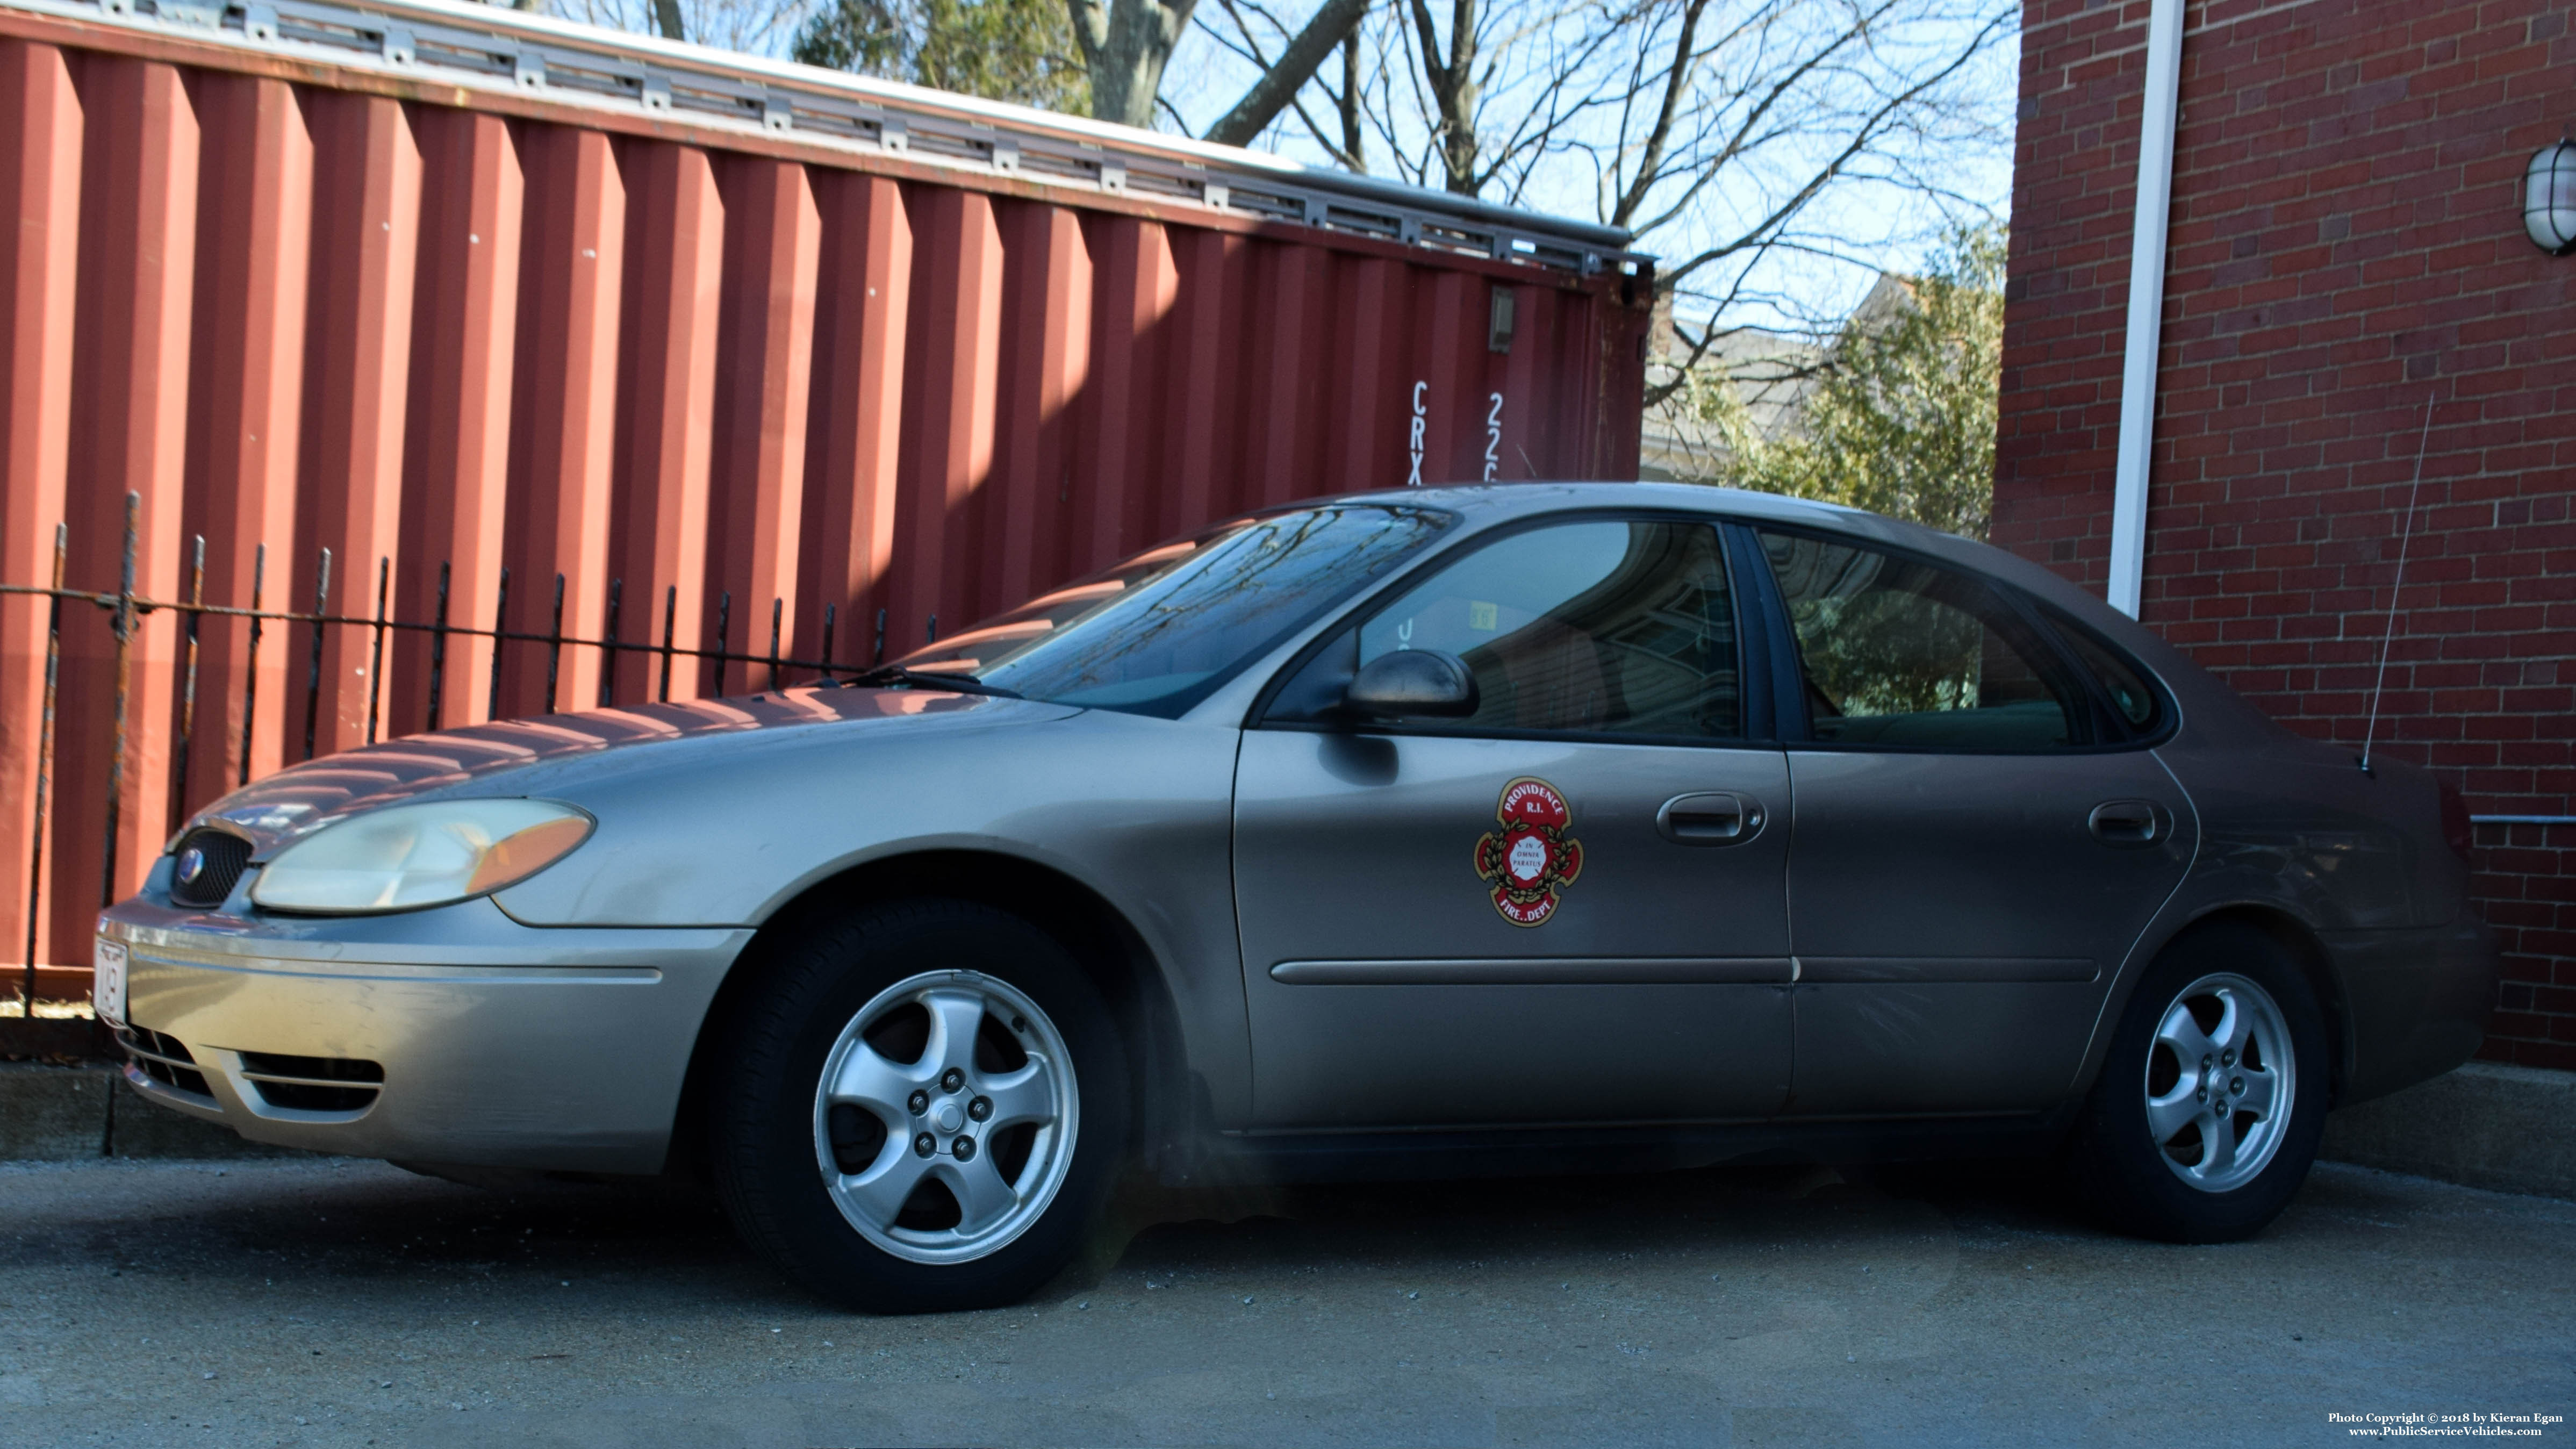 A photo  of Providence Fire
            Spare, a 2004-2007 Ford Taurus             taken by Kieran Egan